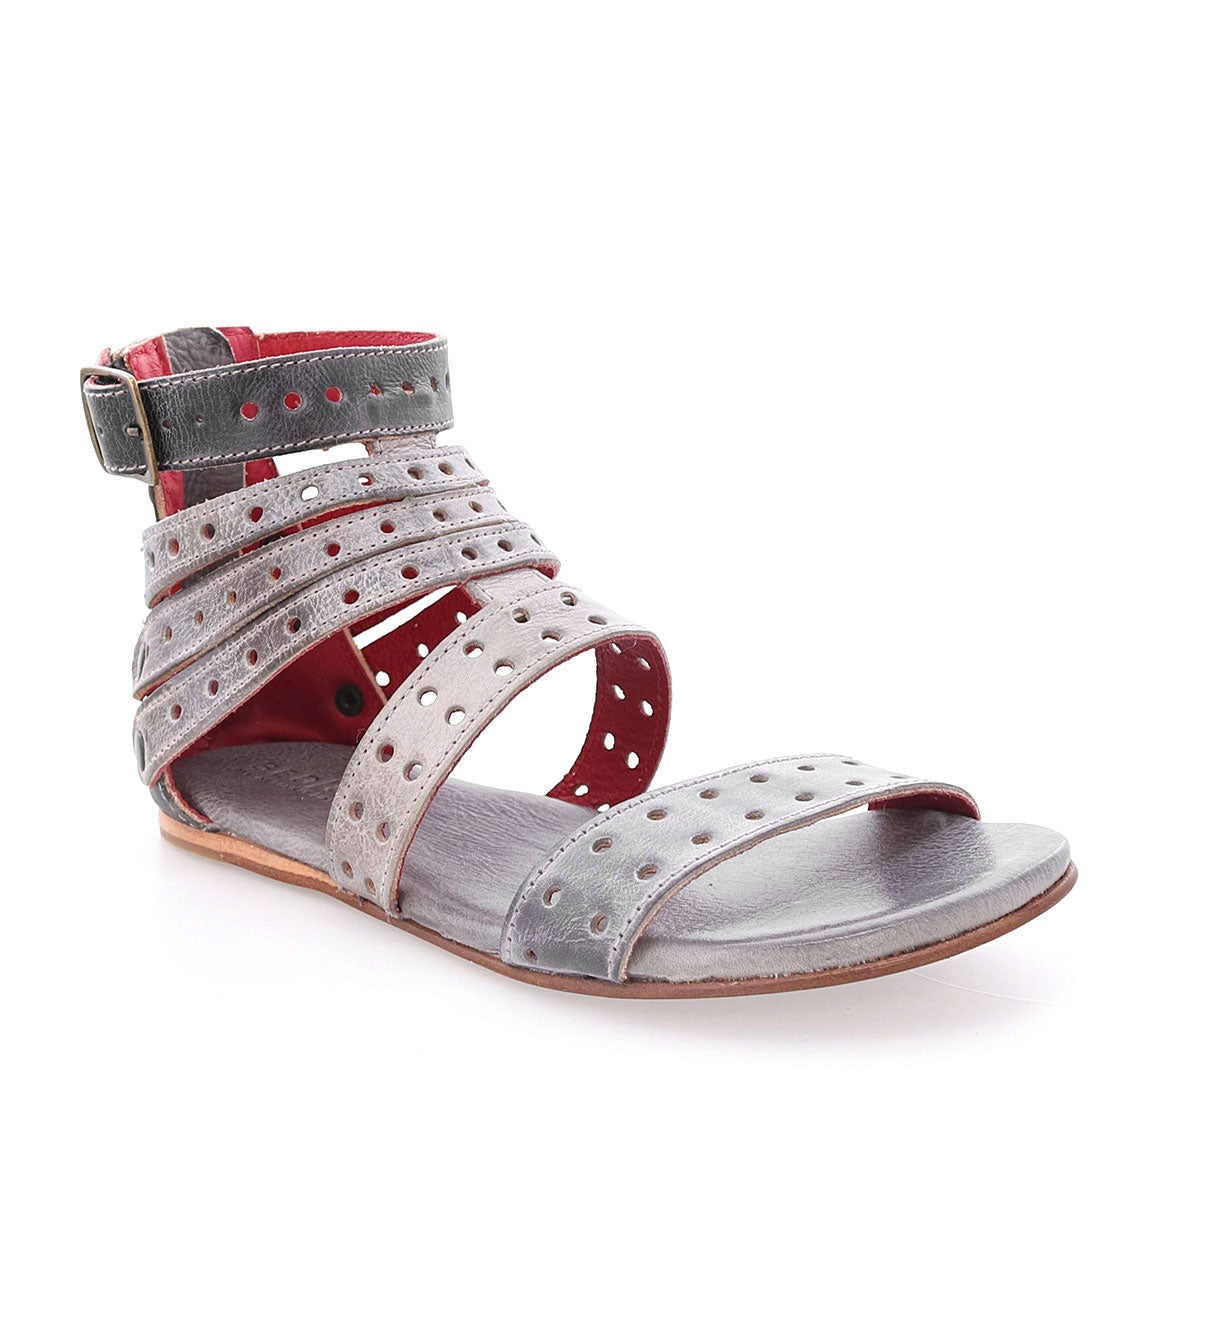 A pair of Bed Stu women's sandals with straps.